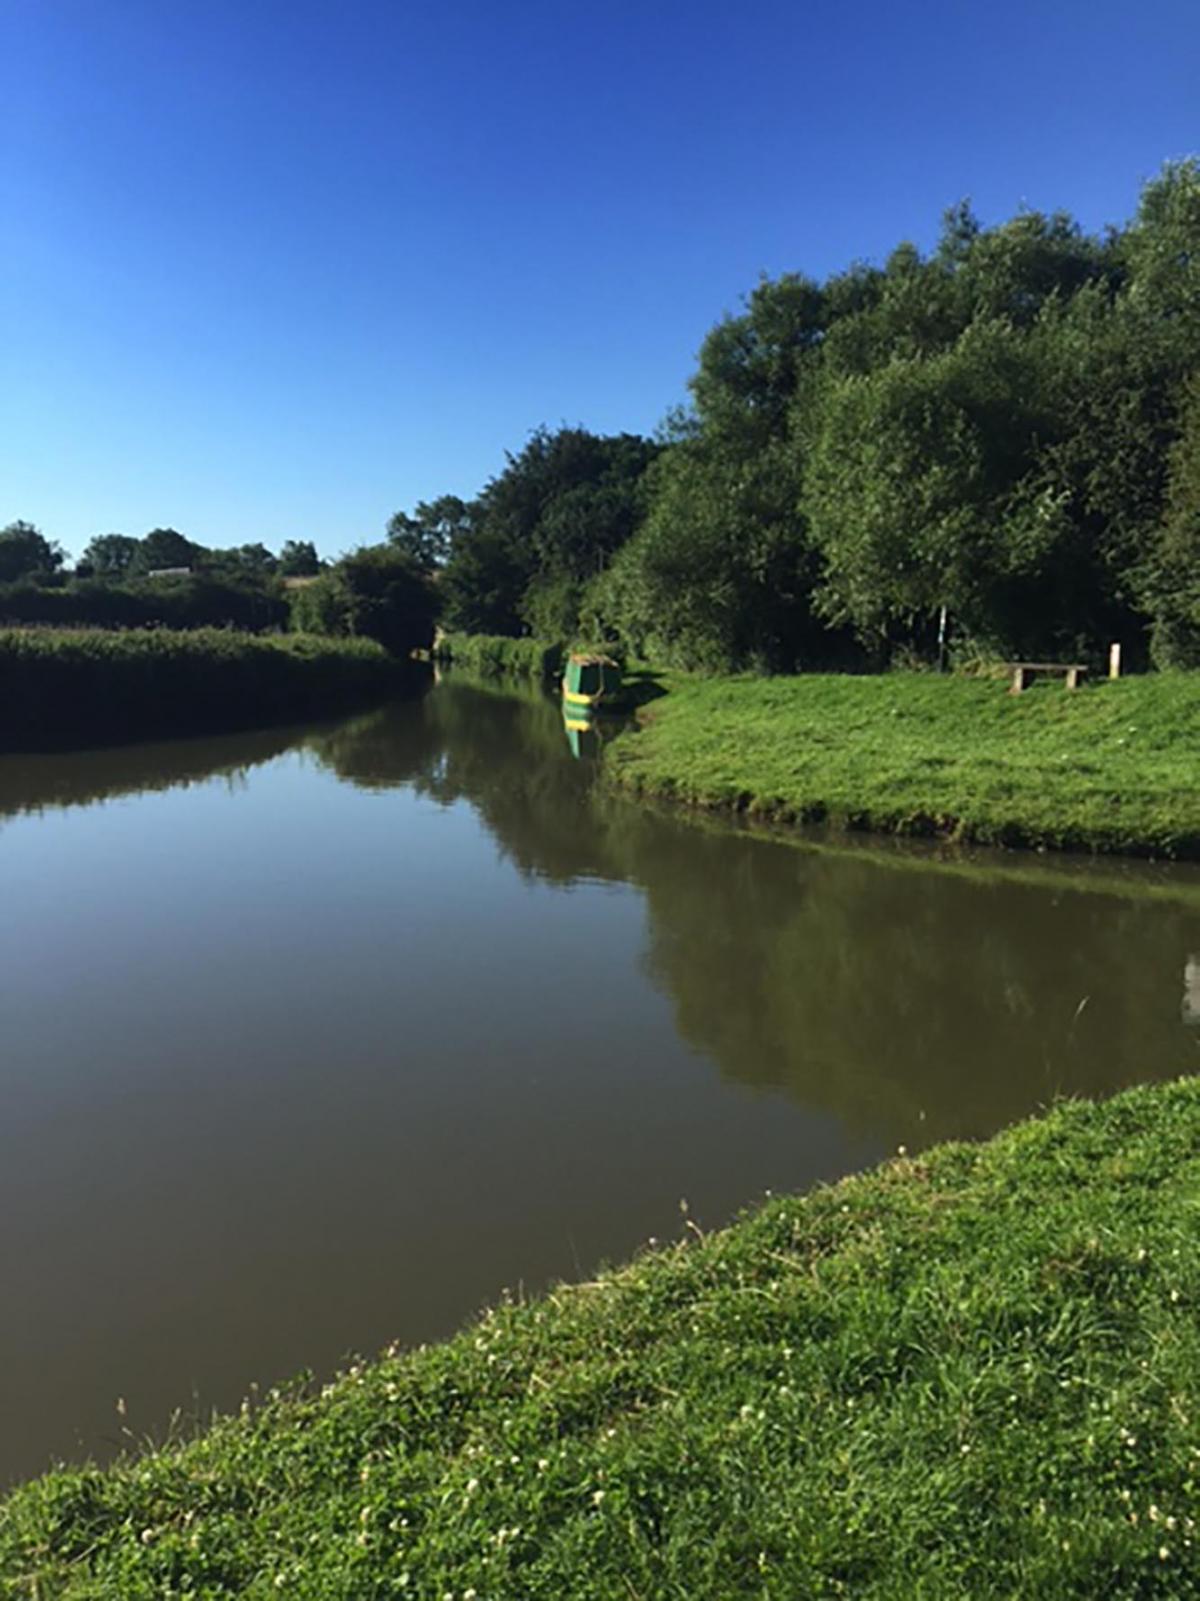 READER'S PICTURE:
A picture of the Oxford Canal taken from Dukes Lock just off the A40.
By Andy Cantwell